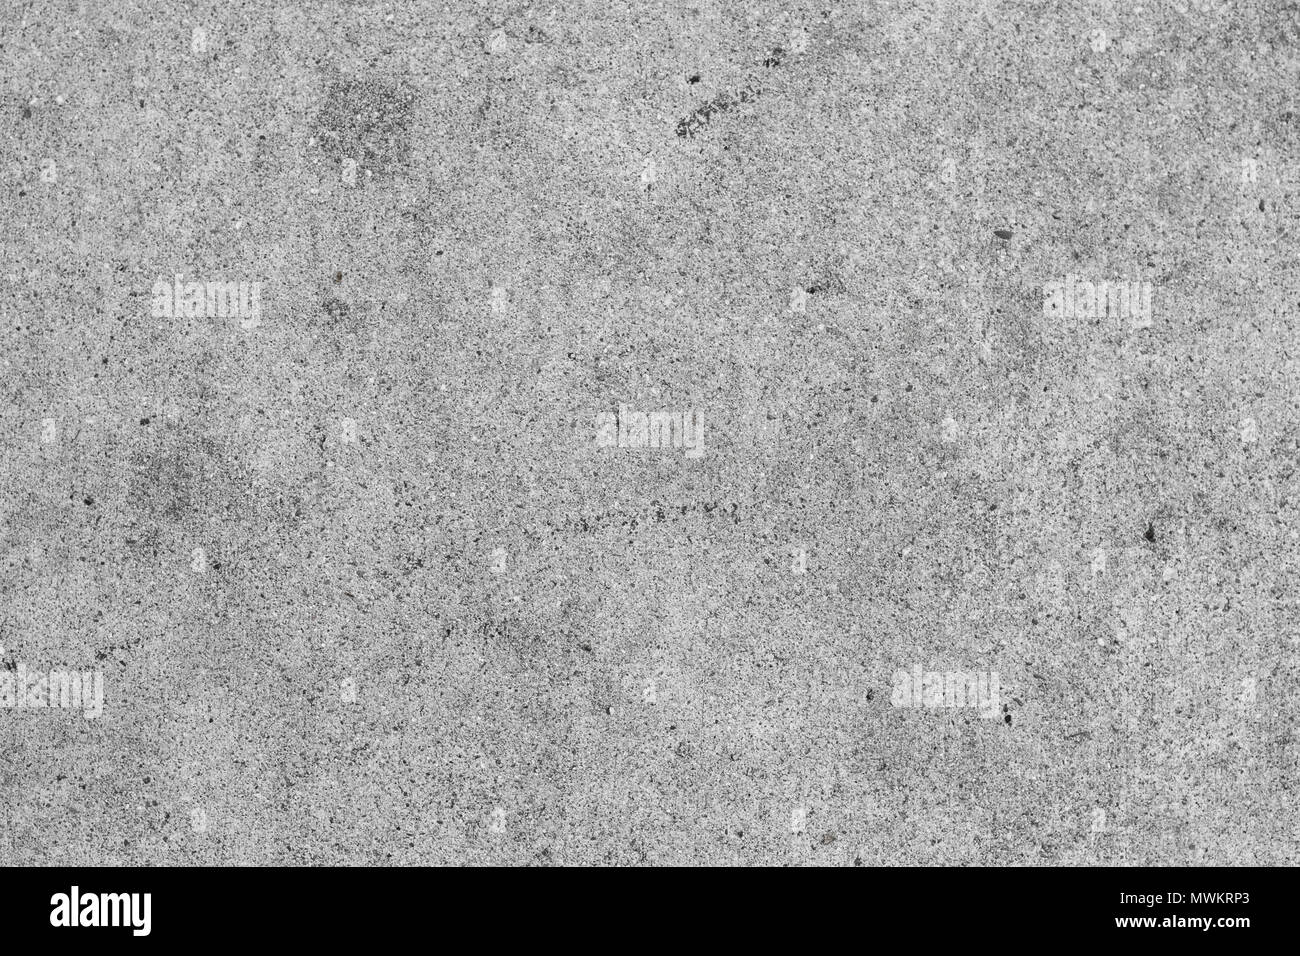 abstract grungy concrete background Stock Photo